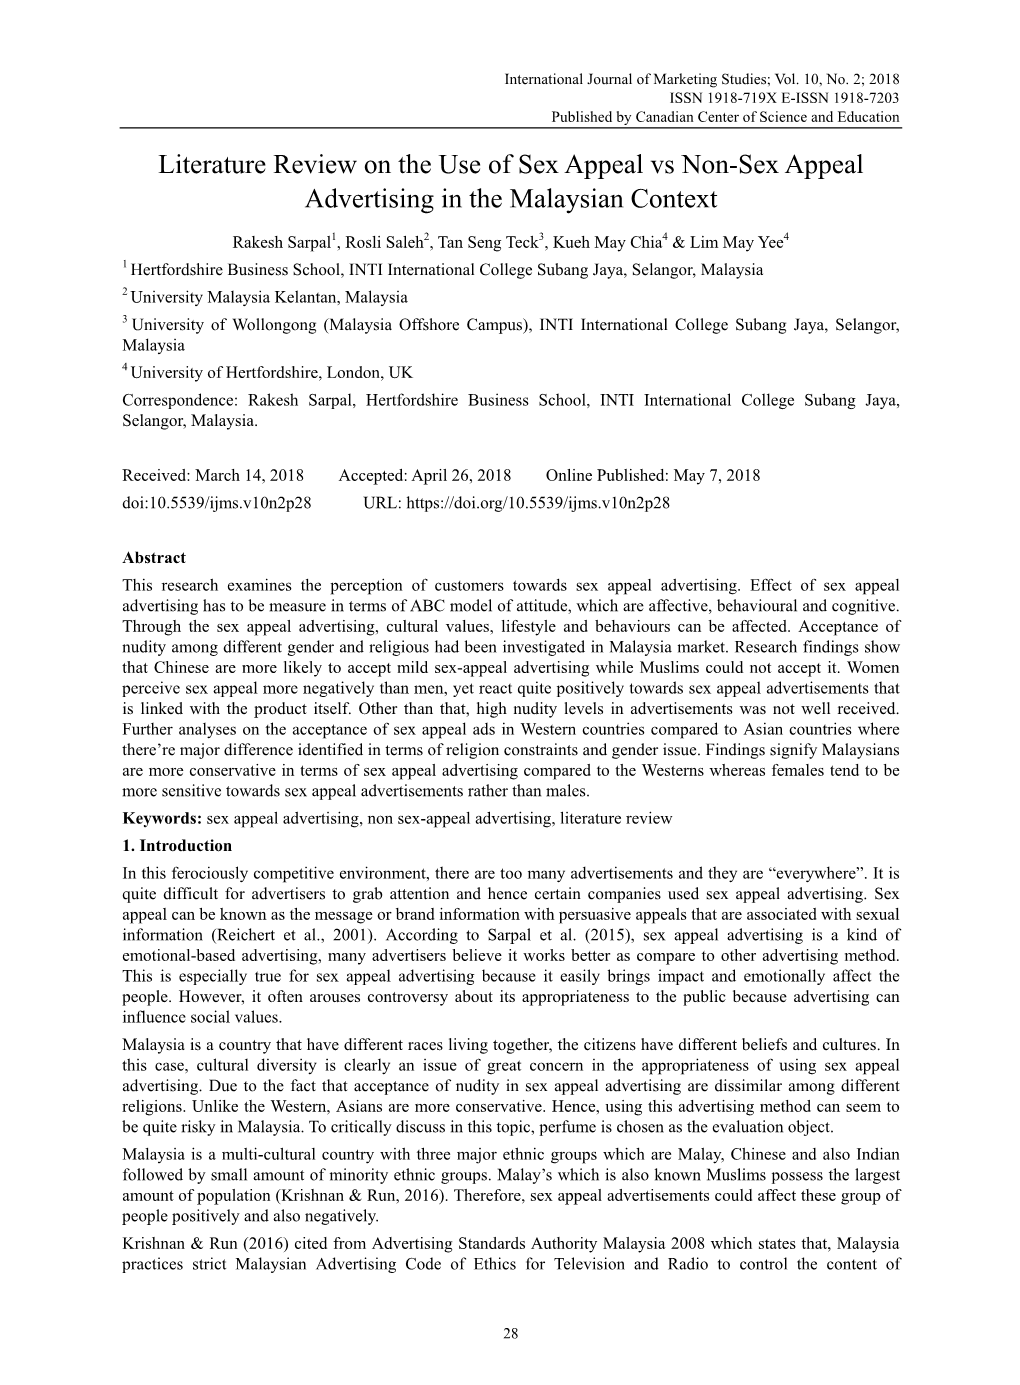 Literature Review on the Use of Sex Appeal Vs Non-Sex Appeal Advertising in the Malaysian Context